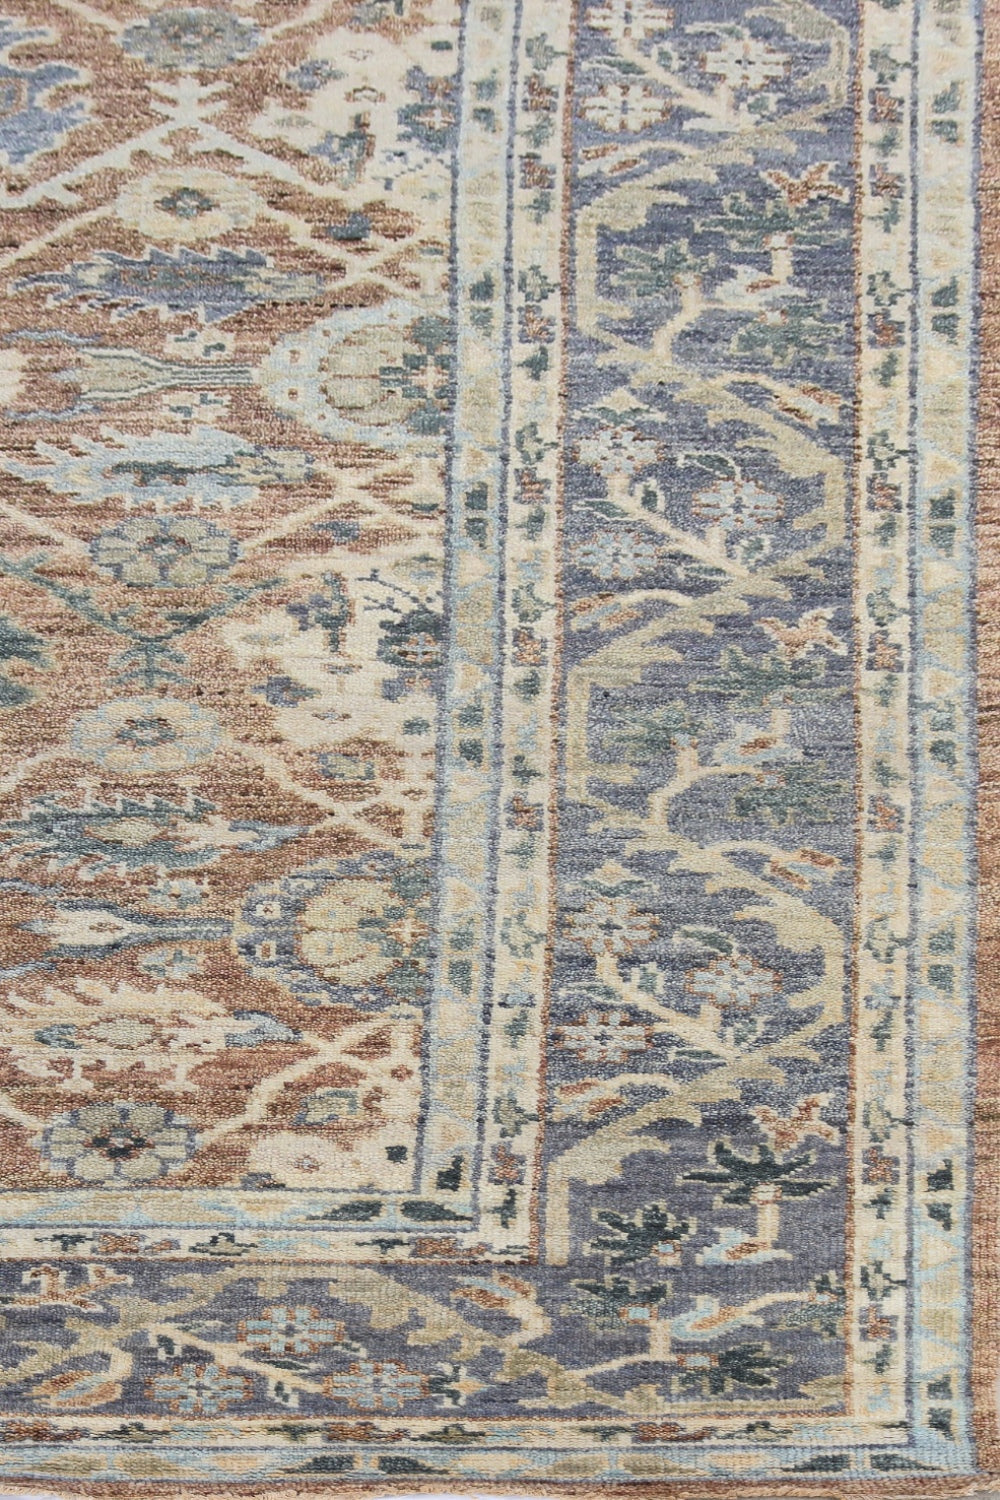 Sultanabad 2 Handwoven Traditional Rug, J71743